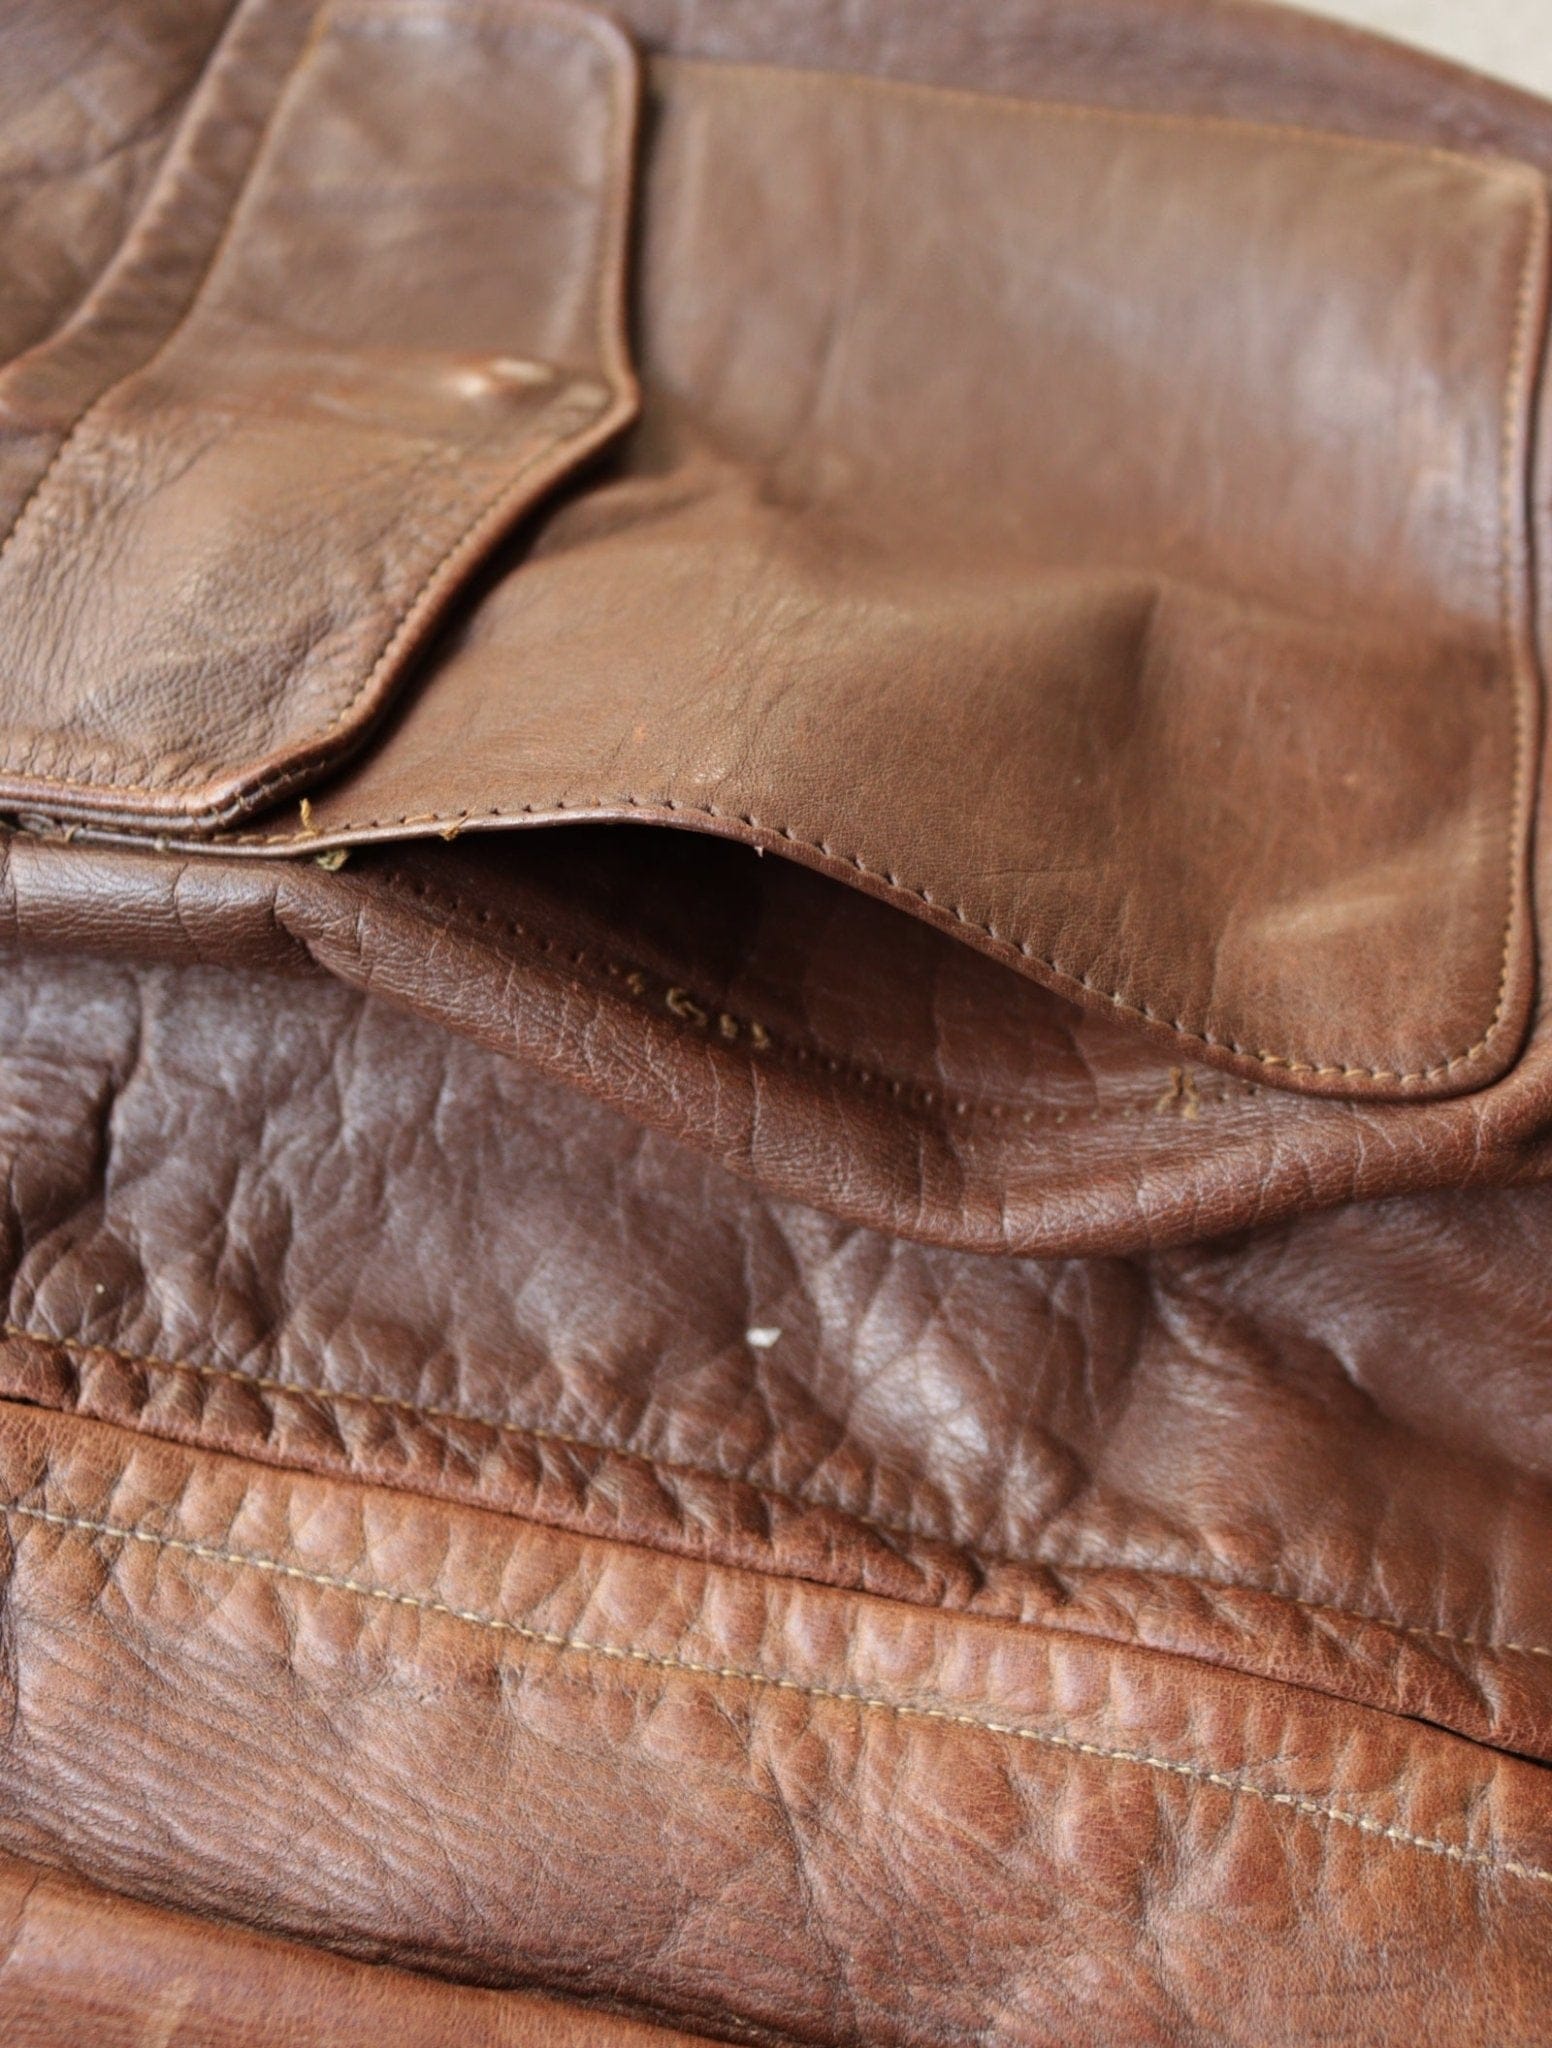 1940S HORSEHIDE LEATHER HERCULES JACKET - TWO FOLD